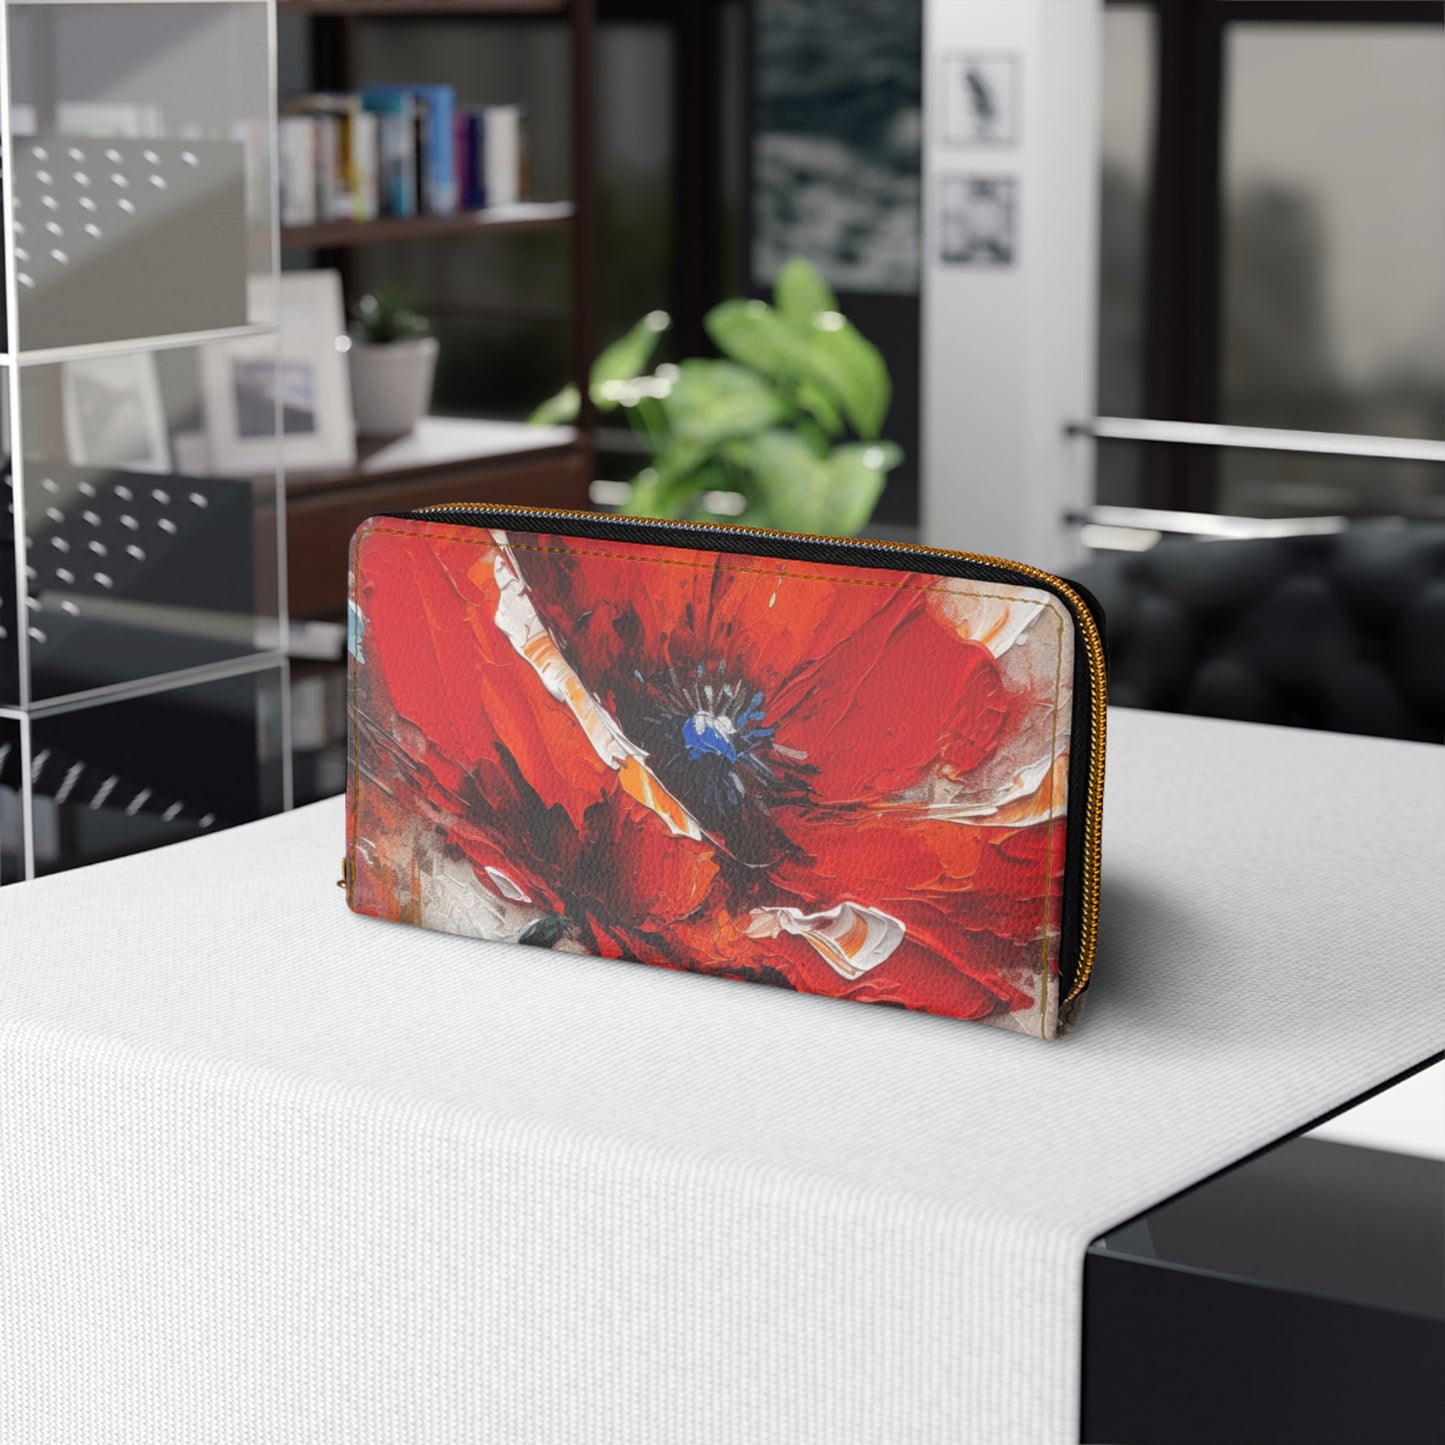 Unleash Your Creativity with Poppy Zipper Wallet: A Blossoming Artistic Journey